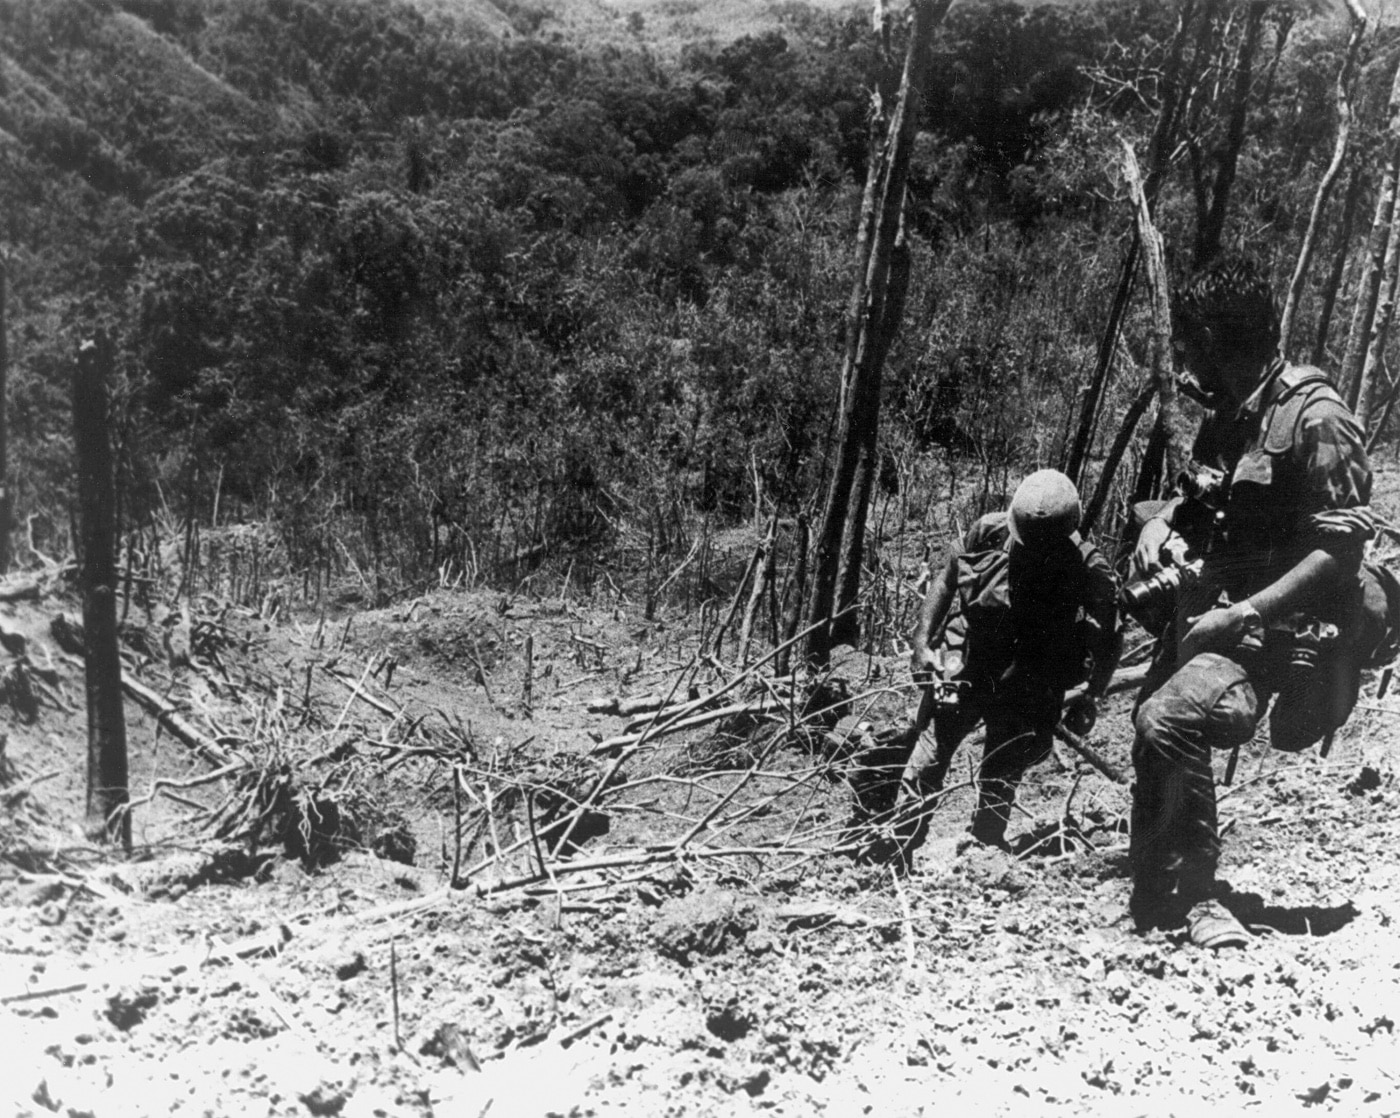 In this image, U.S. soldiers are climbing Hamburger Hill. On the right side of the photo is an Army photographer.